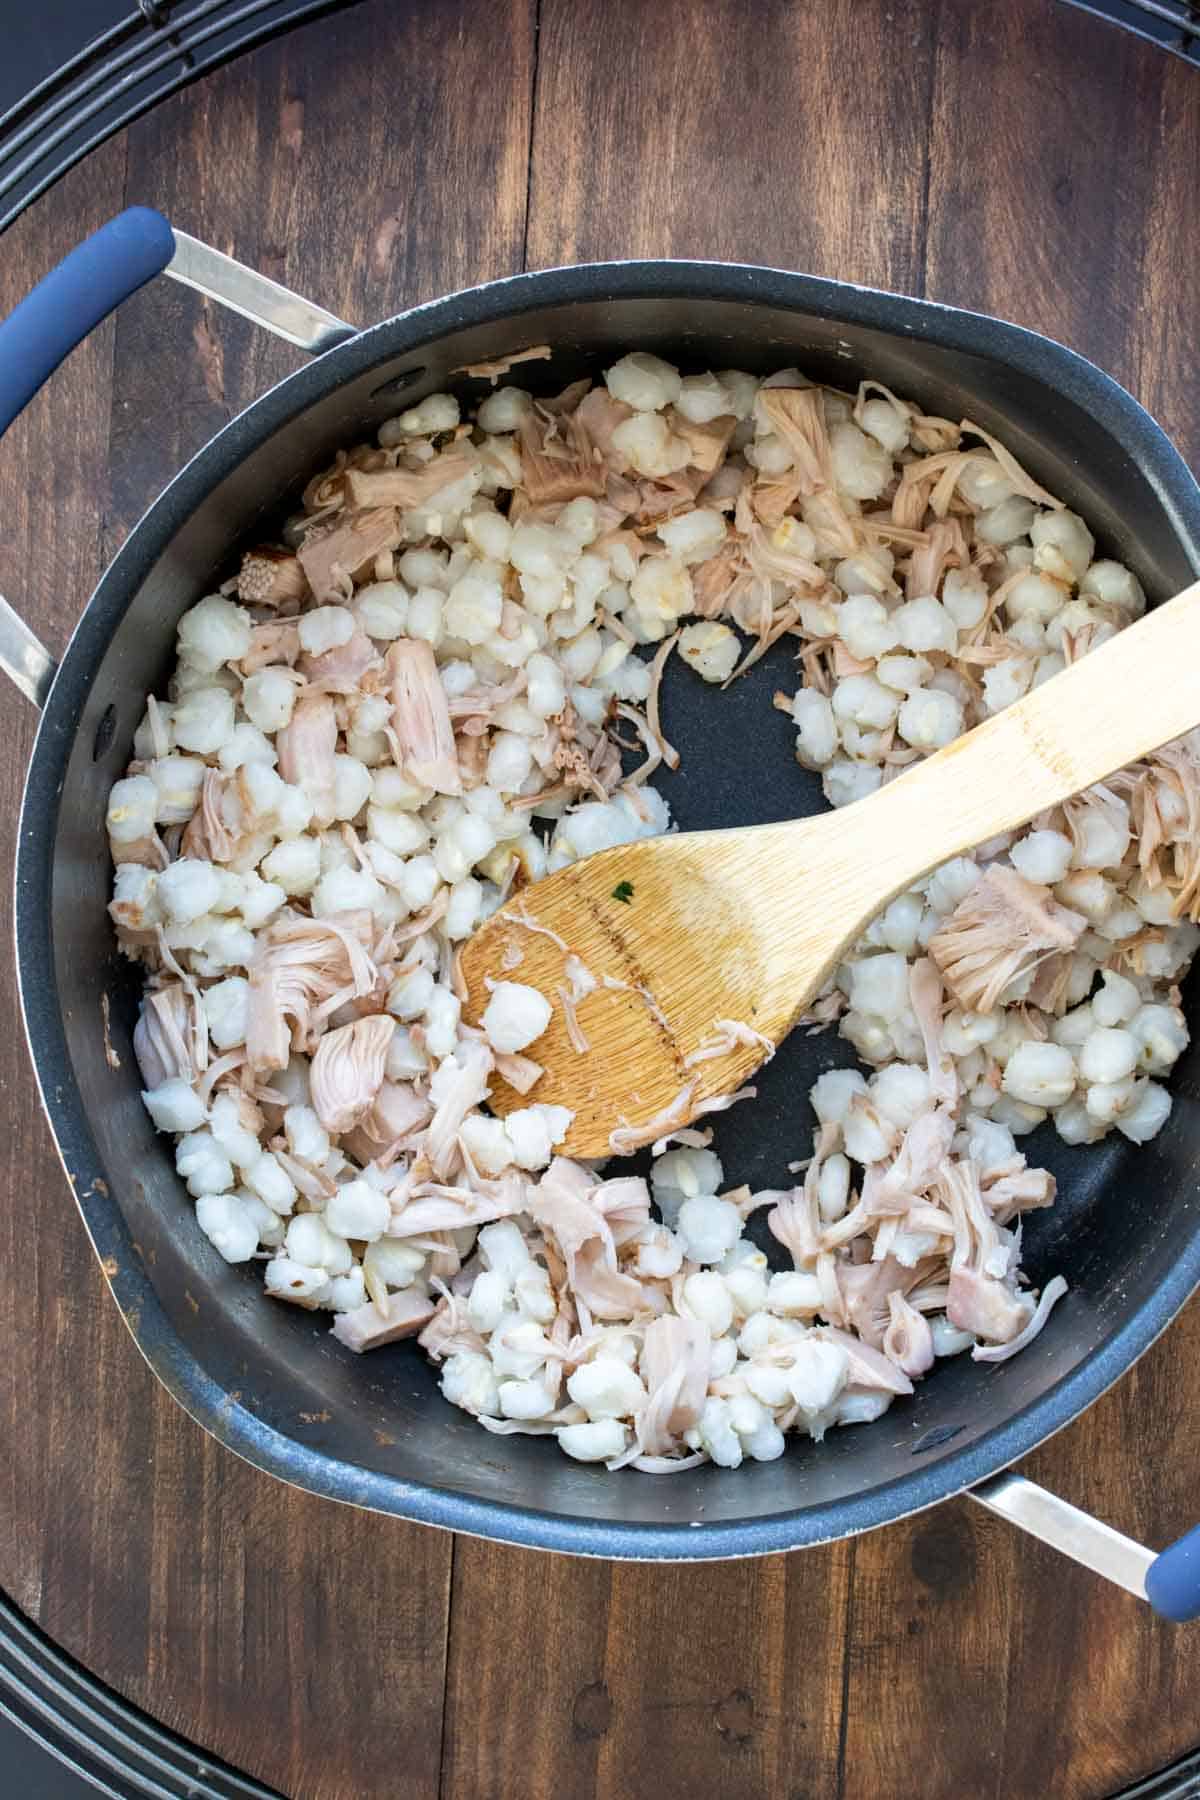 Wooden spoon mixing jackfruit and hominy in a pot